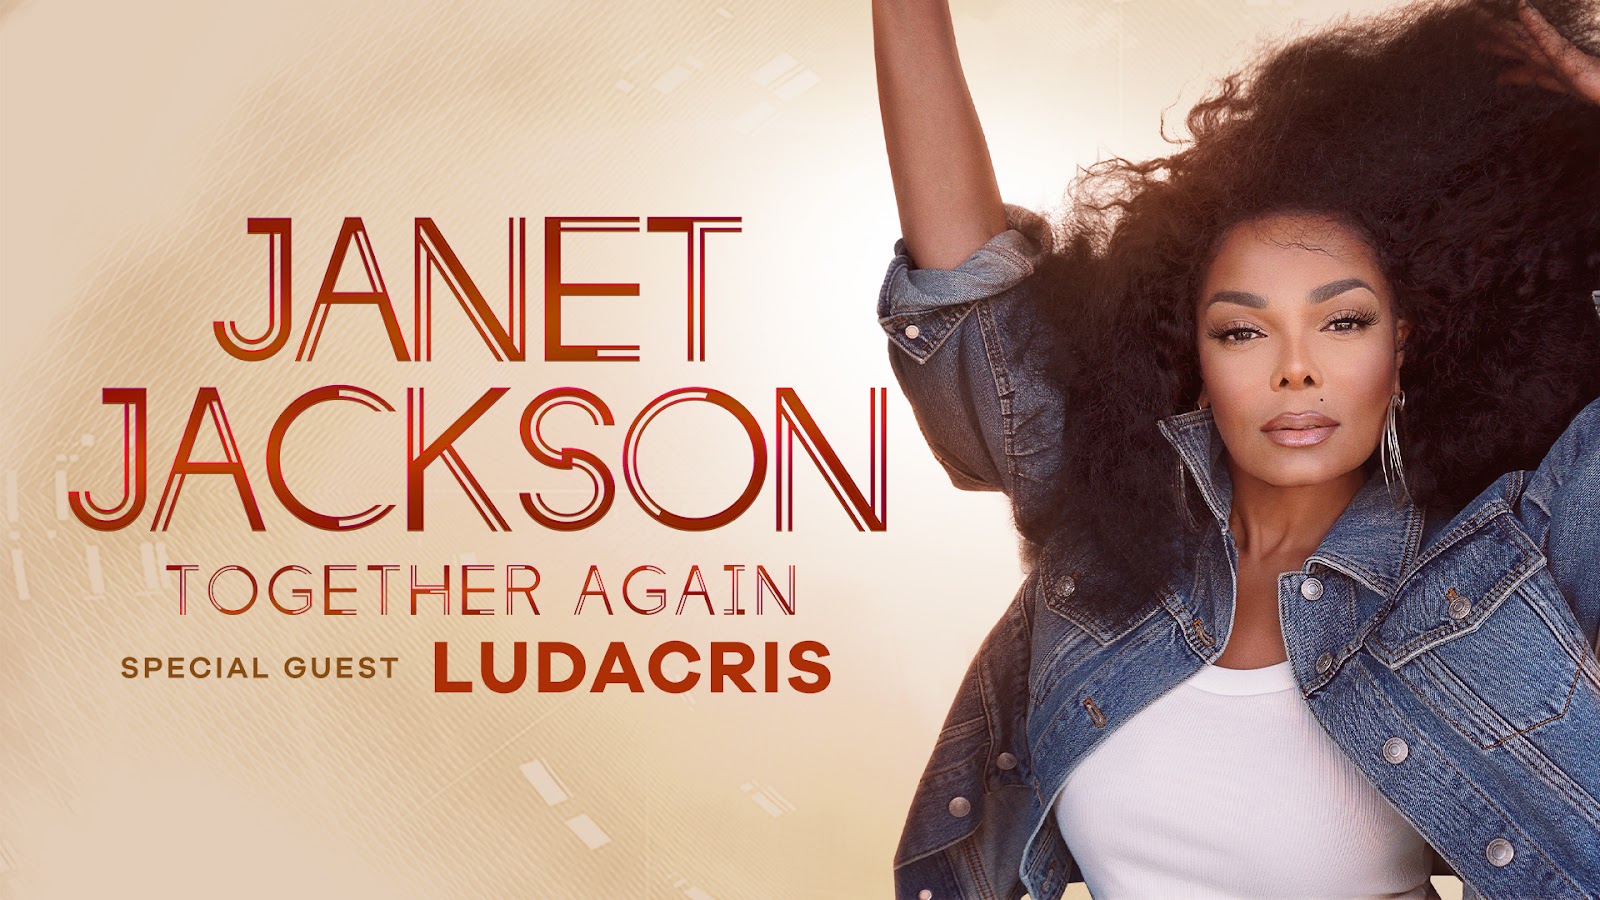 Jackson ‘Together Again’ Tour at Amway Center on Wed, Apr 19th